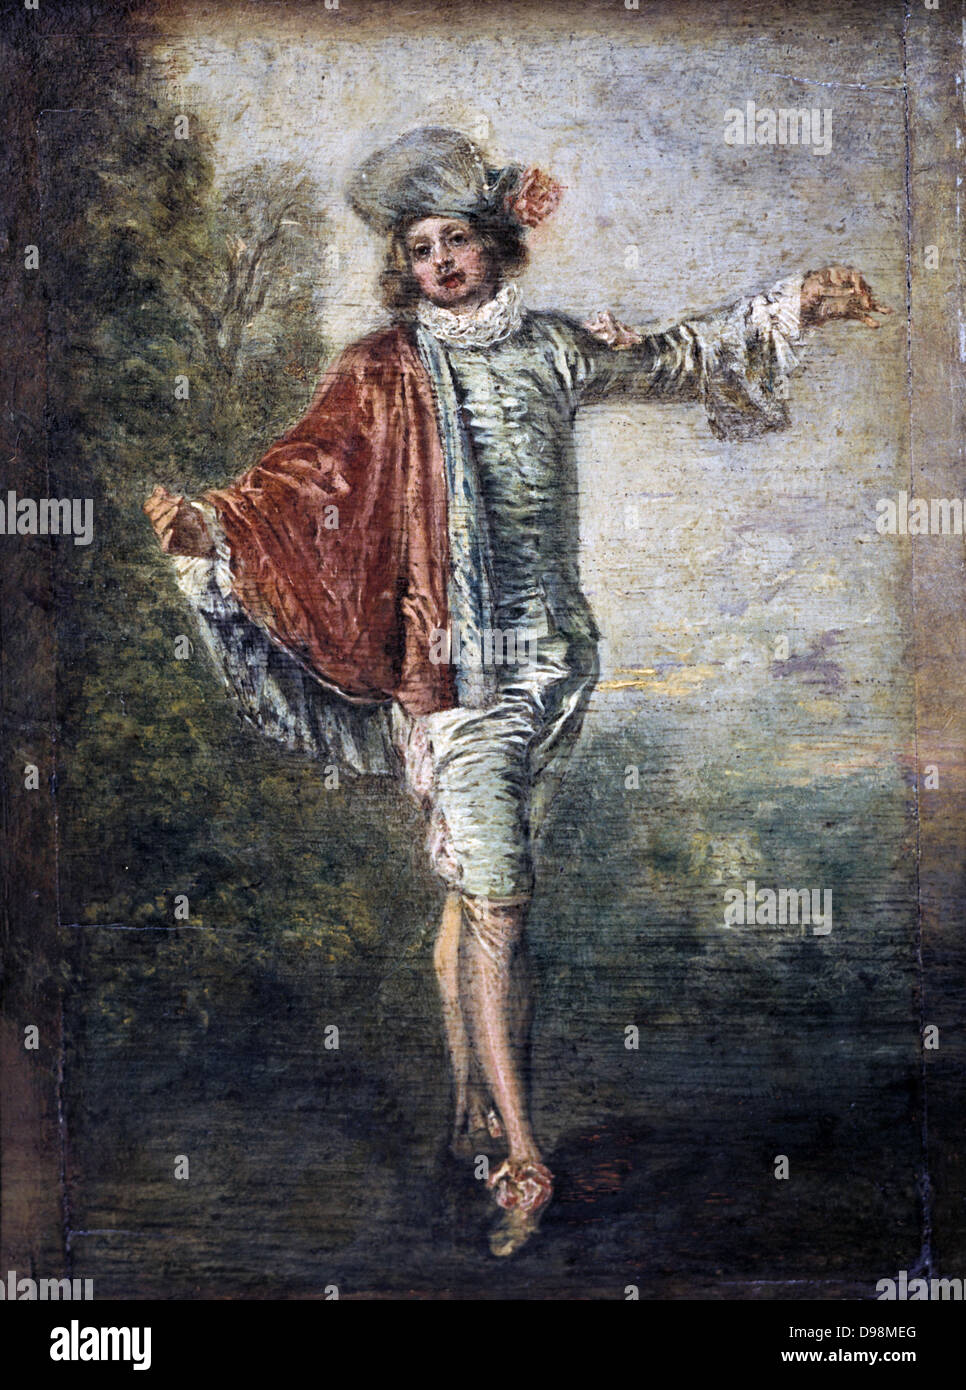 L'Indifferent' (The Gallant: The Flirt) Oil on Canvas. Jean-Antoine Watteau (1684-1721) French painter. Fashion Male Stocking Breeches Shoe Cloak Ruff Fabric Satin Velvet Stock Photo